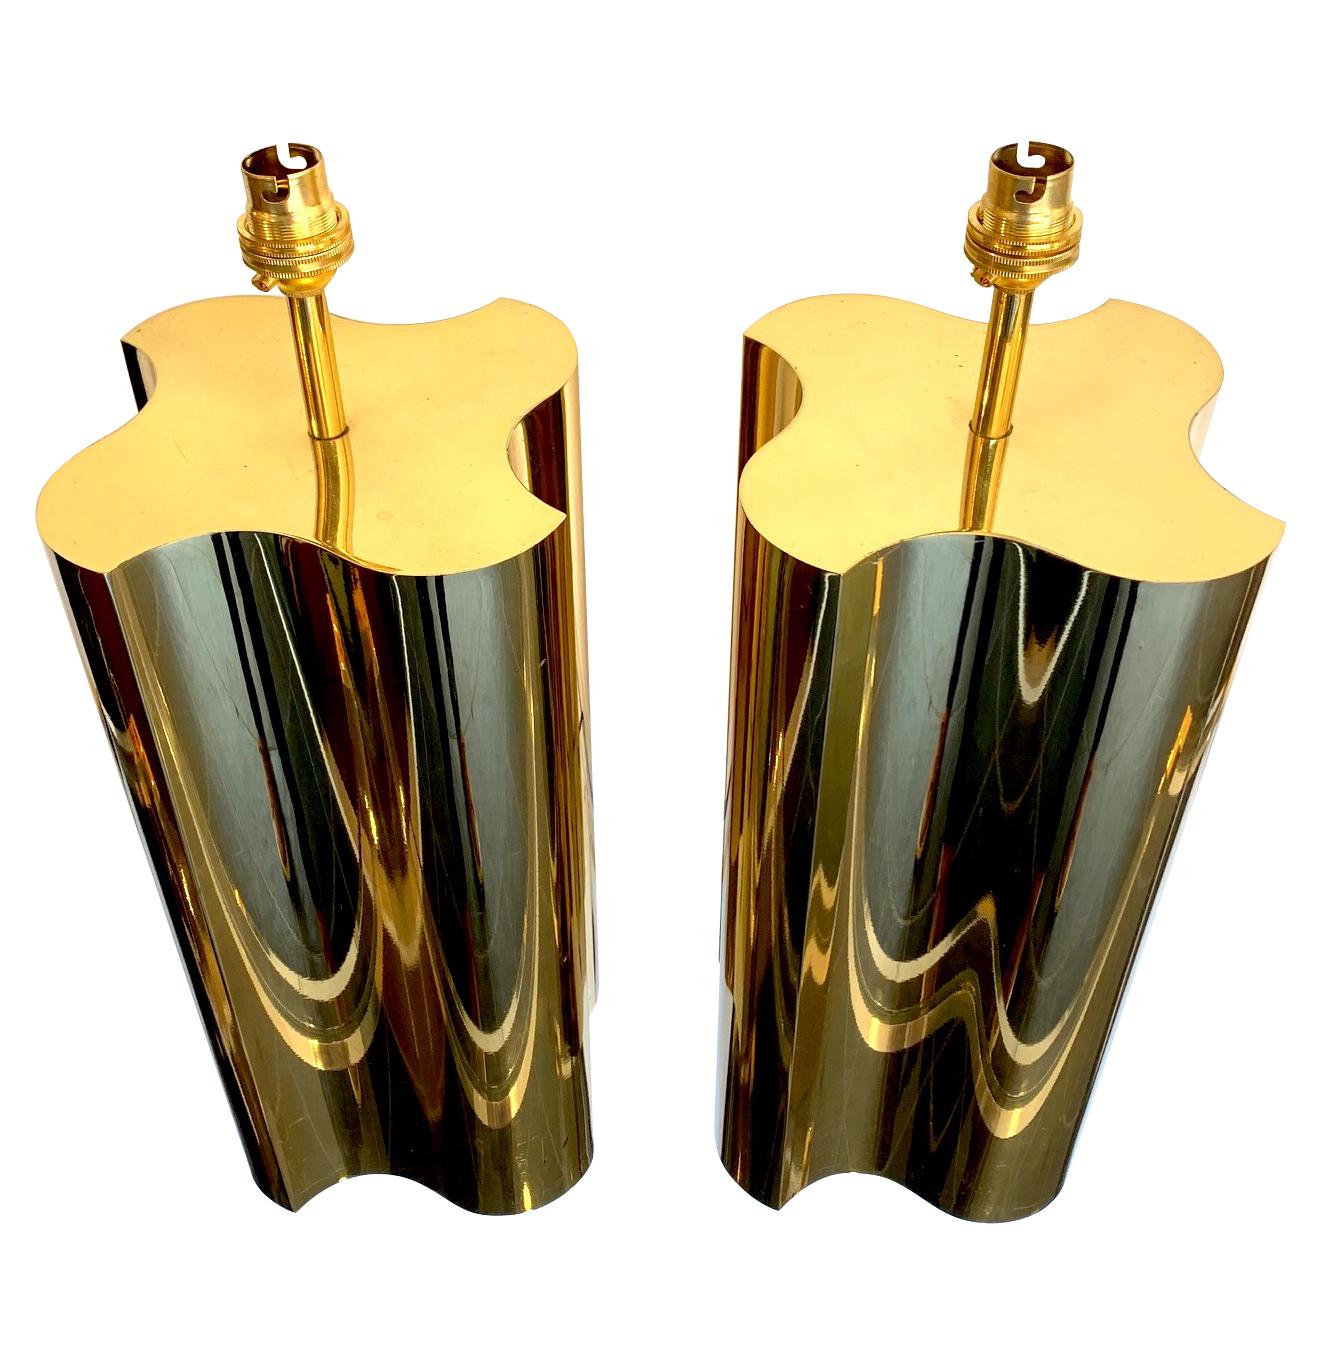 Italian Pair of Large 1970s Brass Lamps with Interesting Curved Corners and New Shades